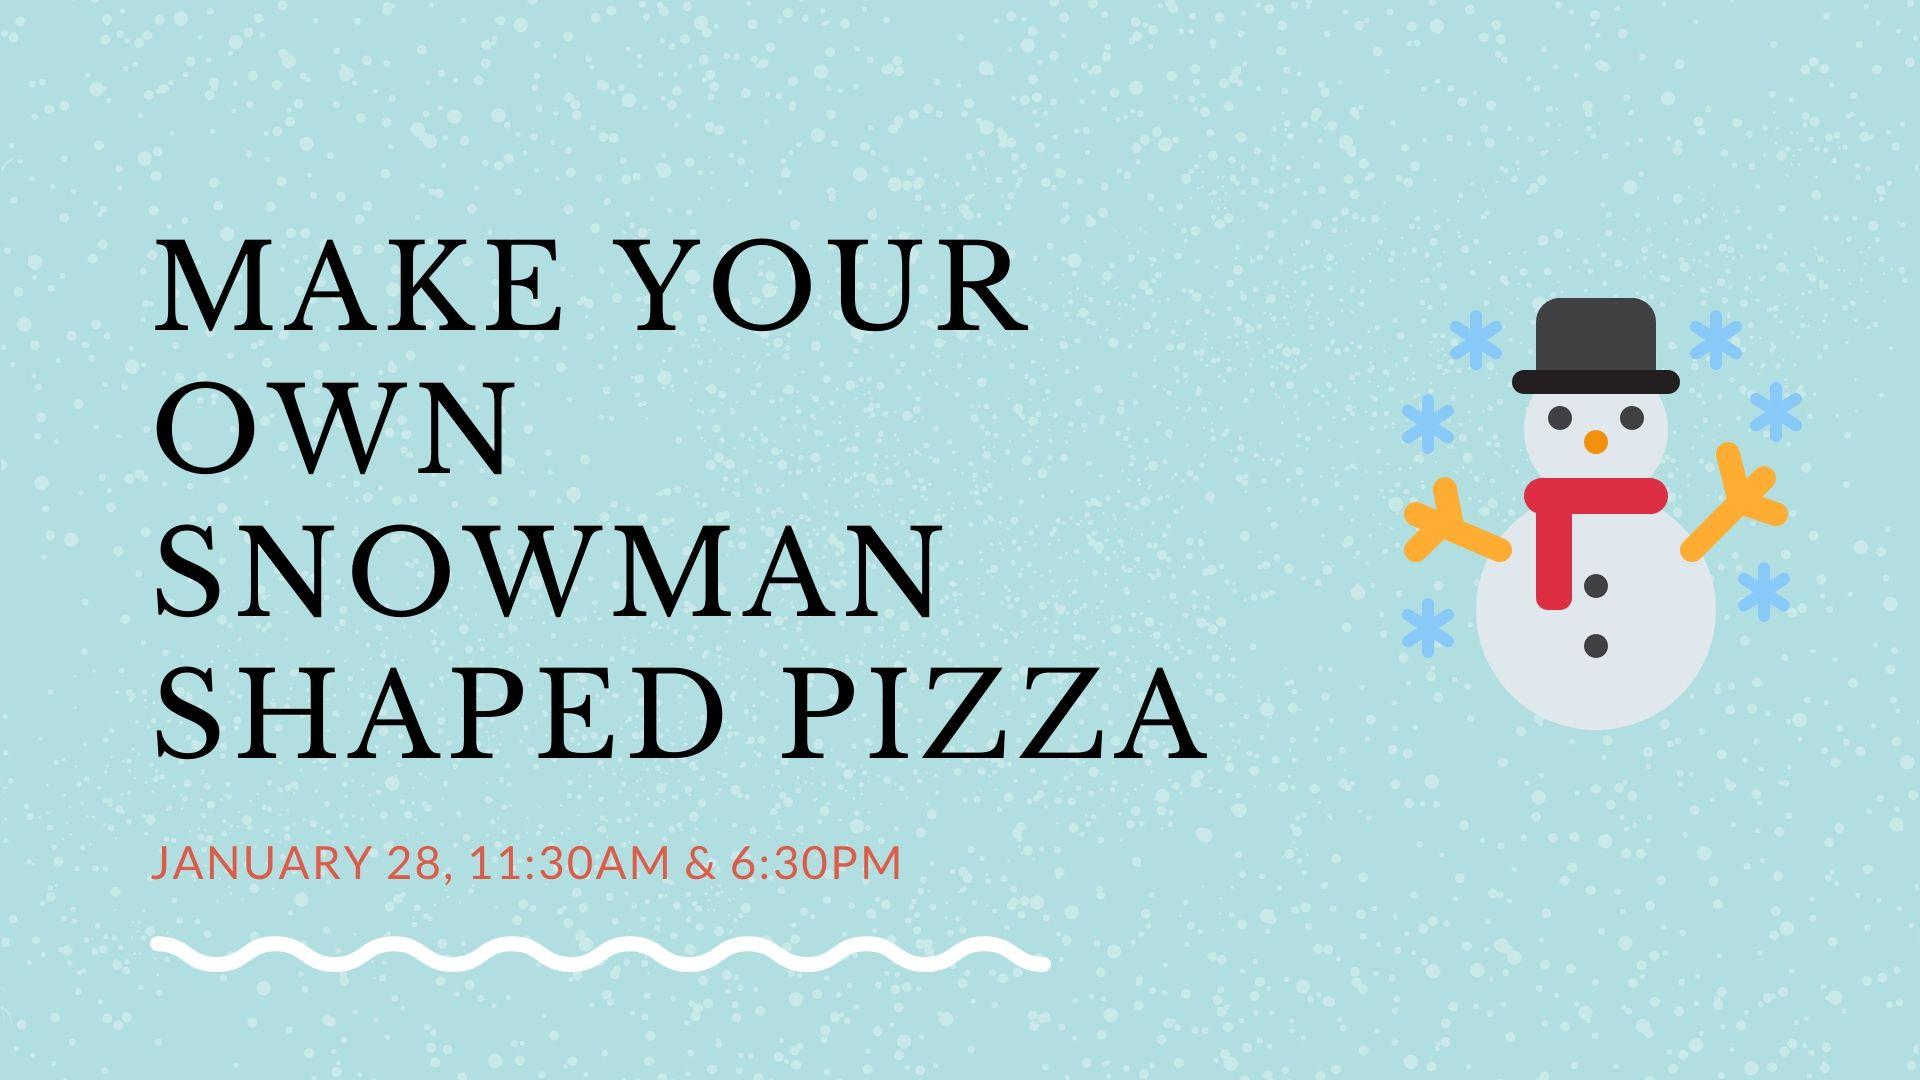 Make Your Own Snowman Shaped Pizza 6:30pm